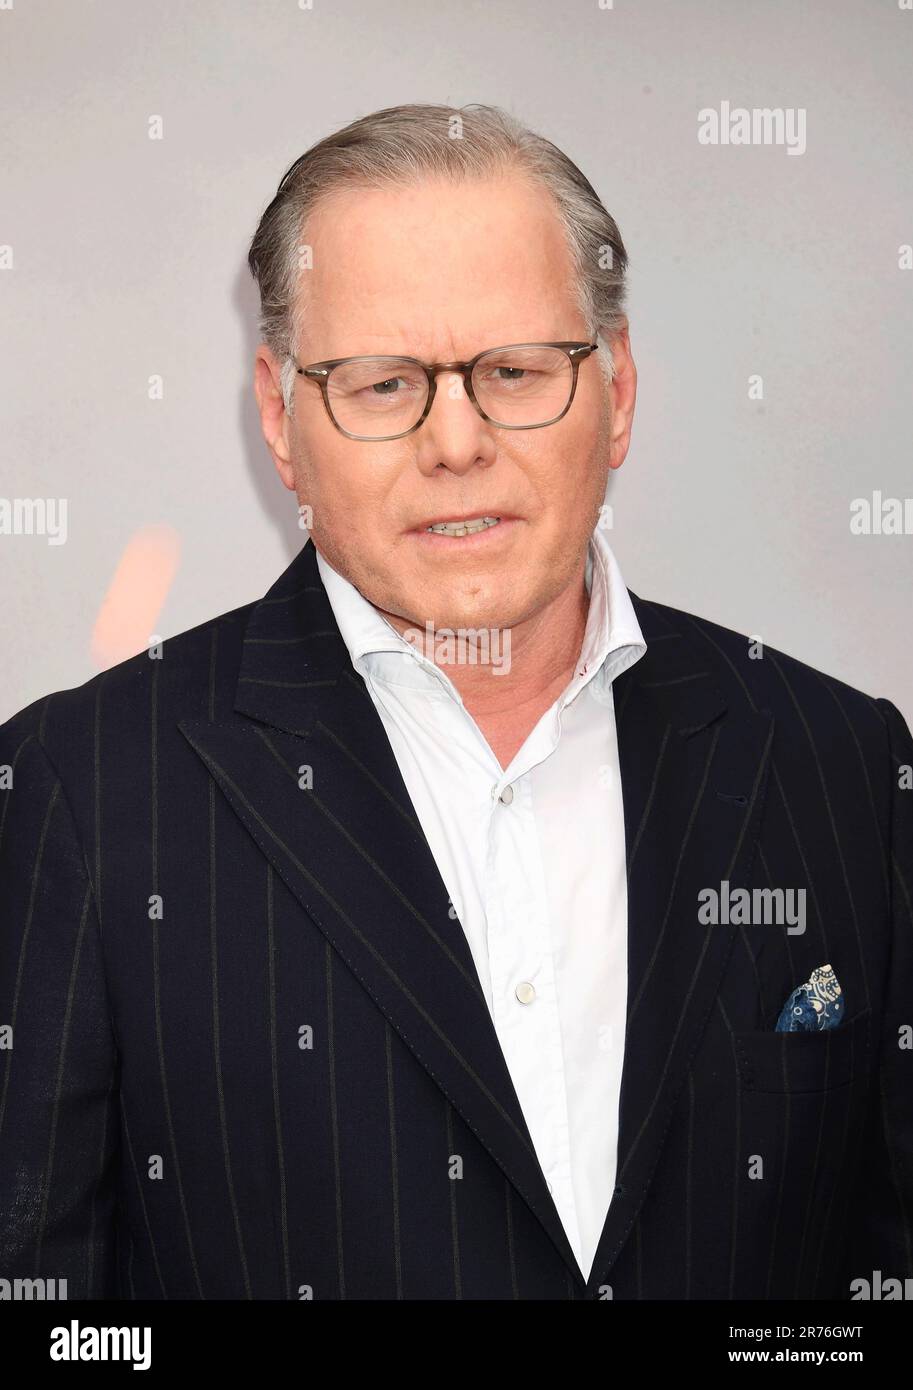 Hollywood, California, USA. 12th June, 2023. CEO Warner Bros. Discovery David Zaslav attends the Los Angeles premiere of Warner Bros. 'The Flash' at Ovation Hollywood on June 12, 2023 in Hollywood, California. Credit: Jeffrey Mayer/Jtm Photos/Media Punch/Alamy Live News Stock Photo